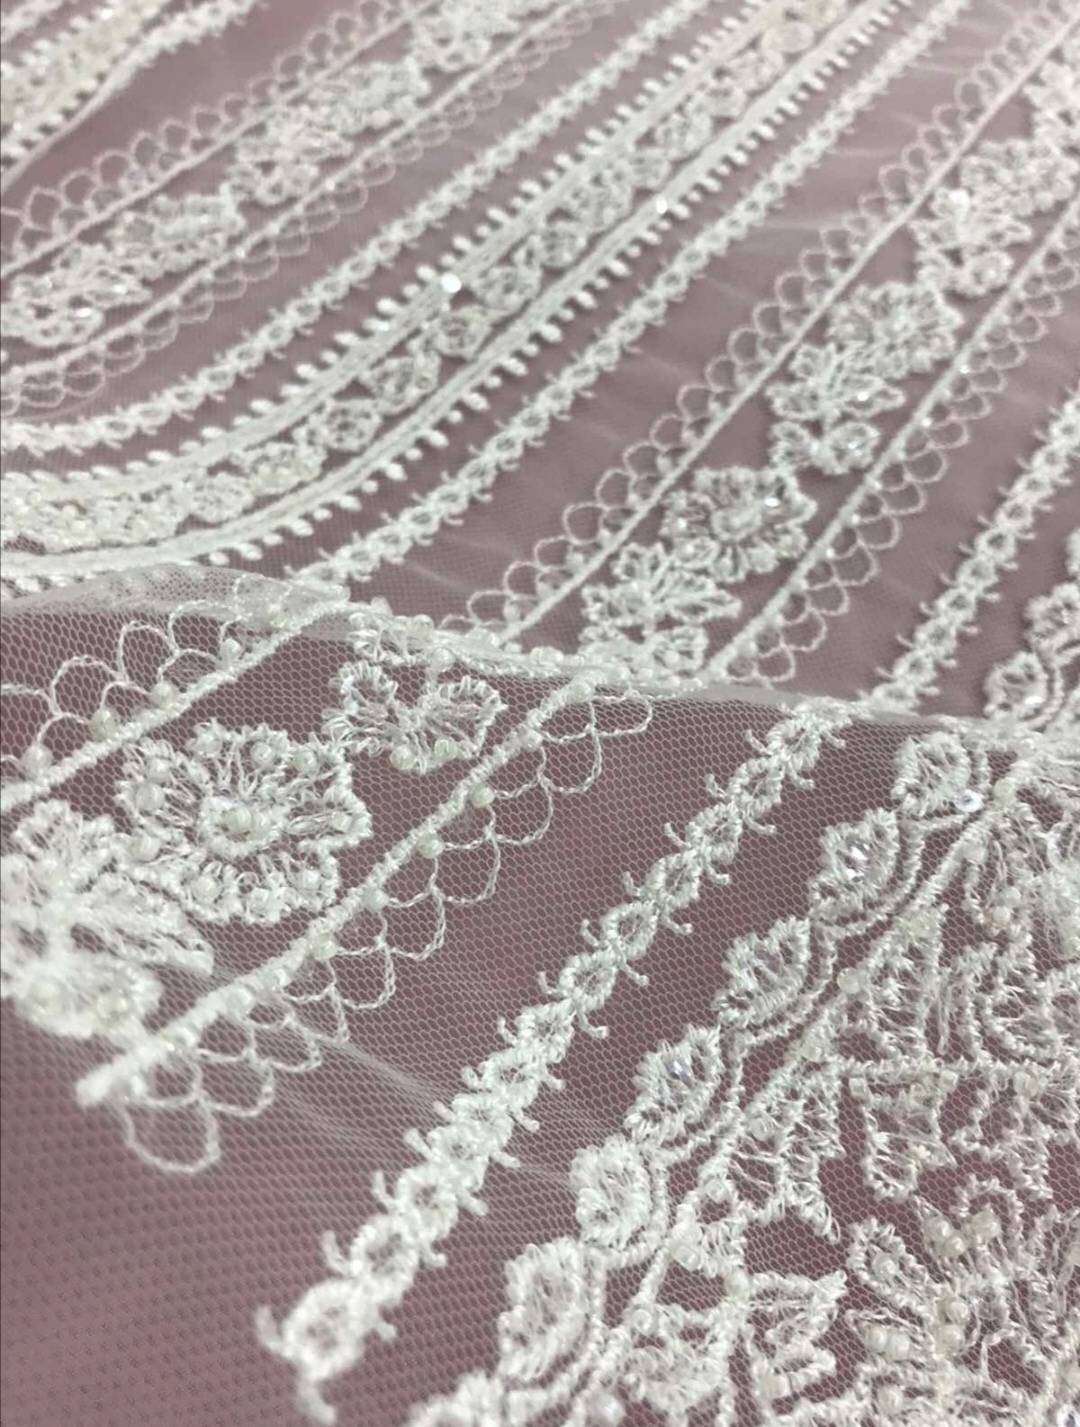 3D Ivory Geometric Bridal Lace Fabric Couture Fabric Lace for | Etsy